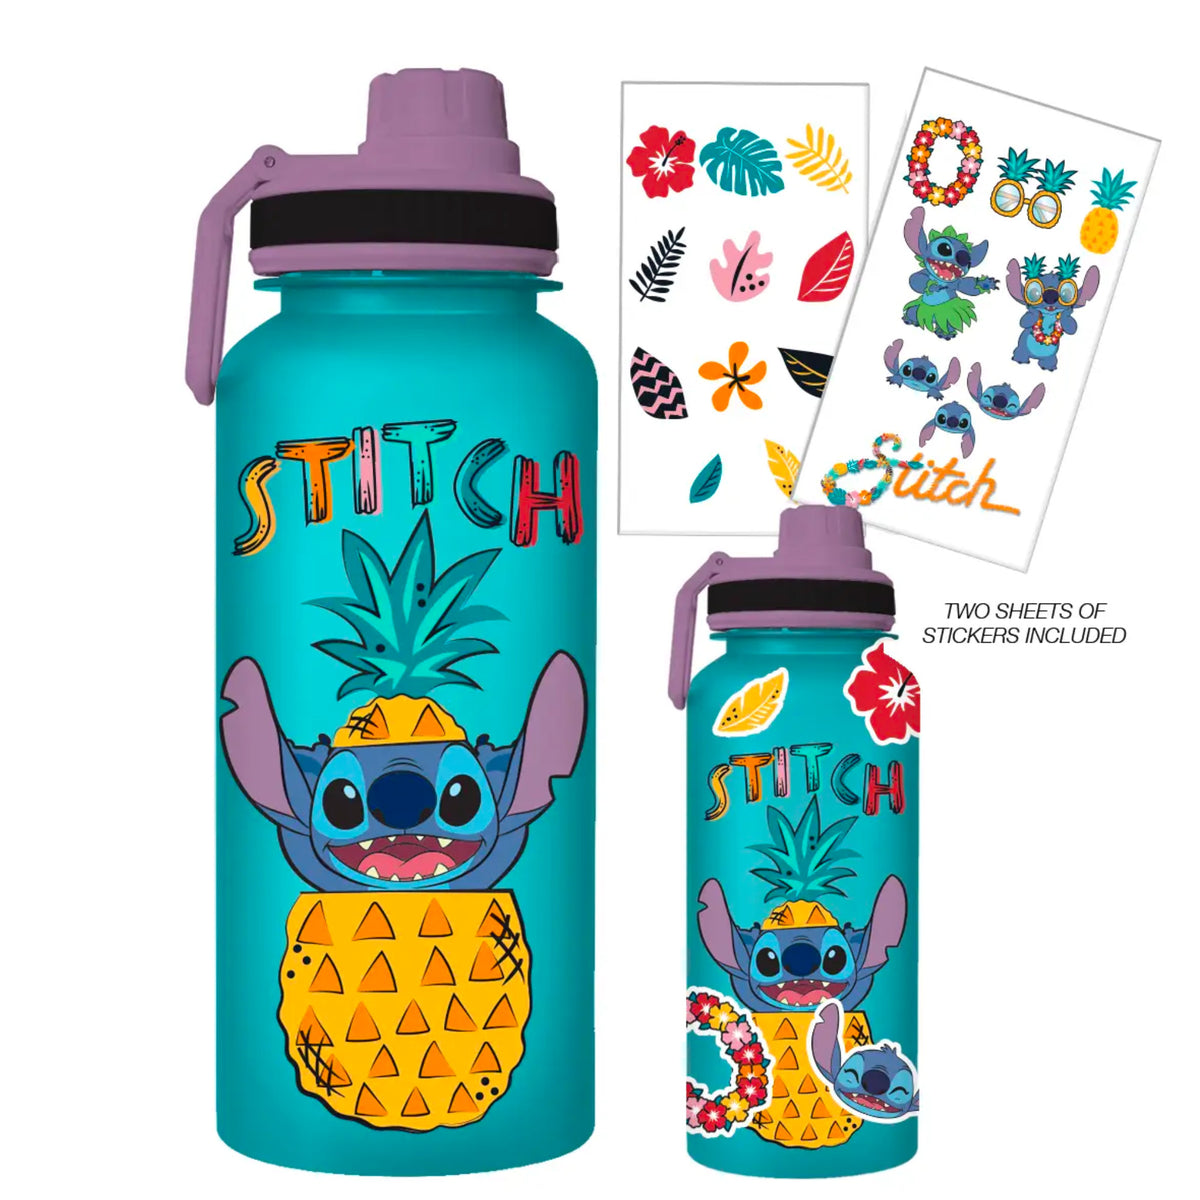 Stitch 32oz Water Bottle with Stickers